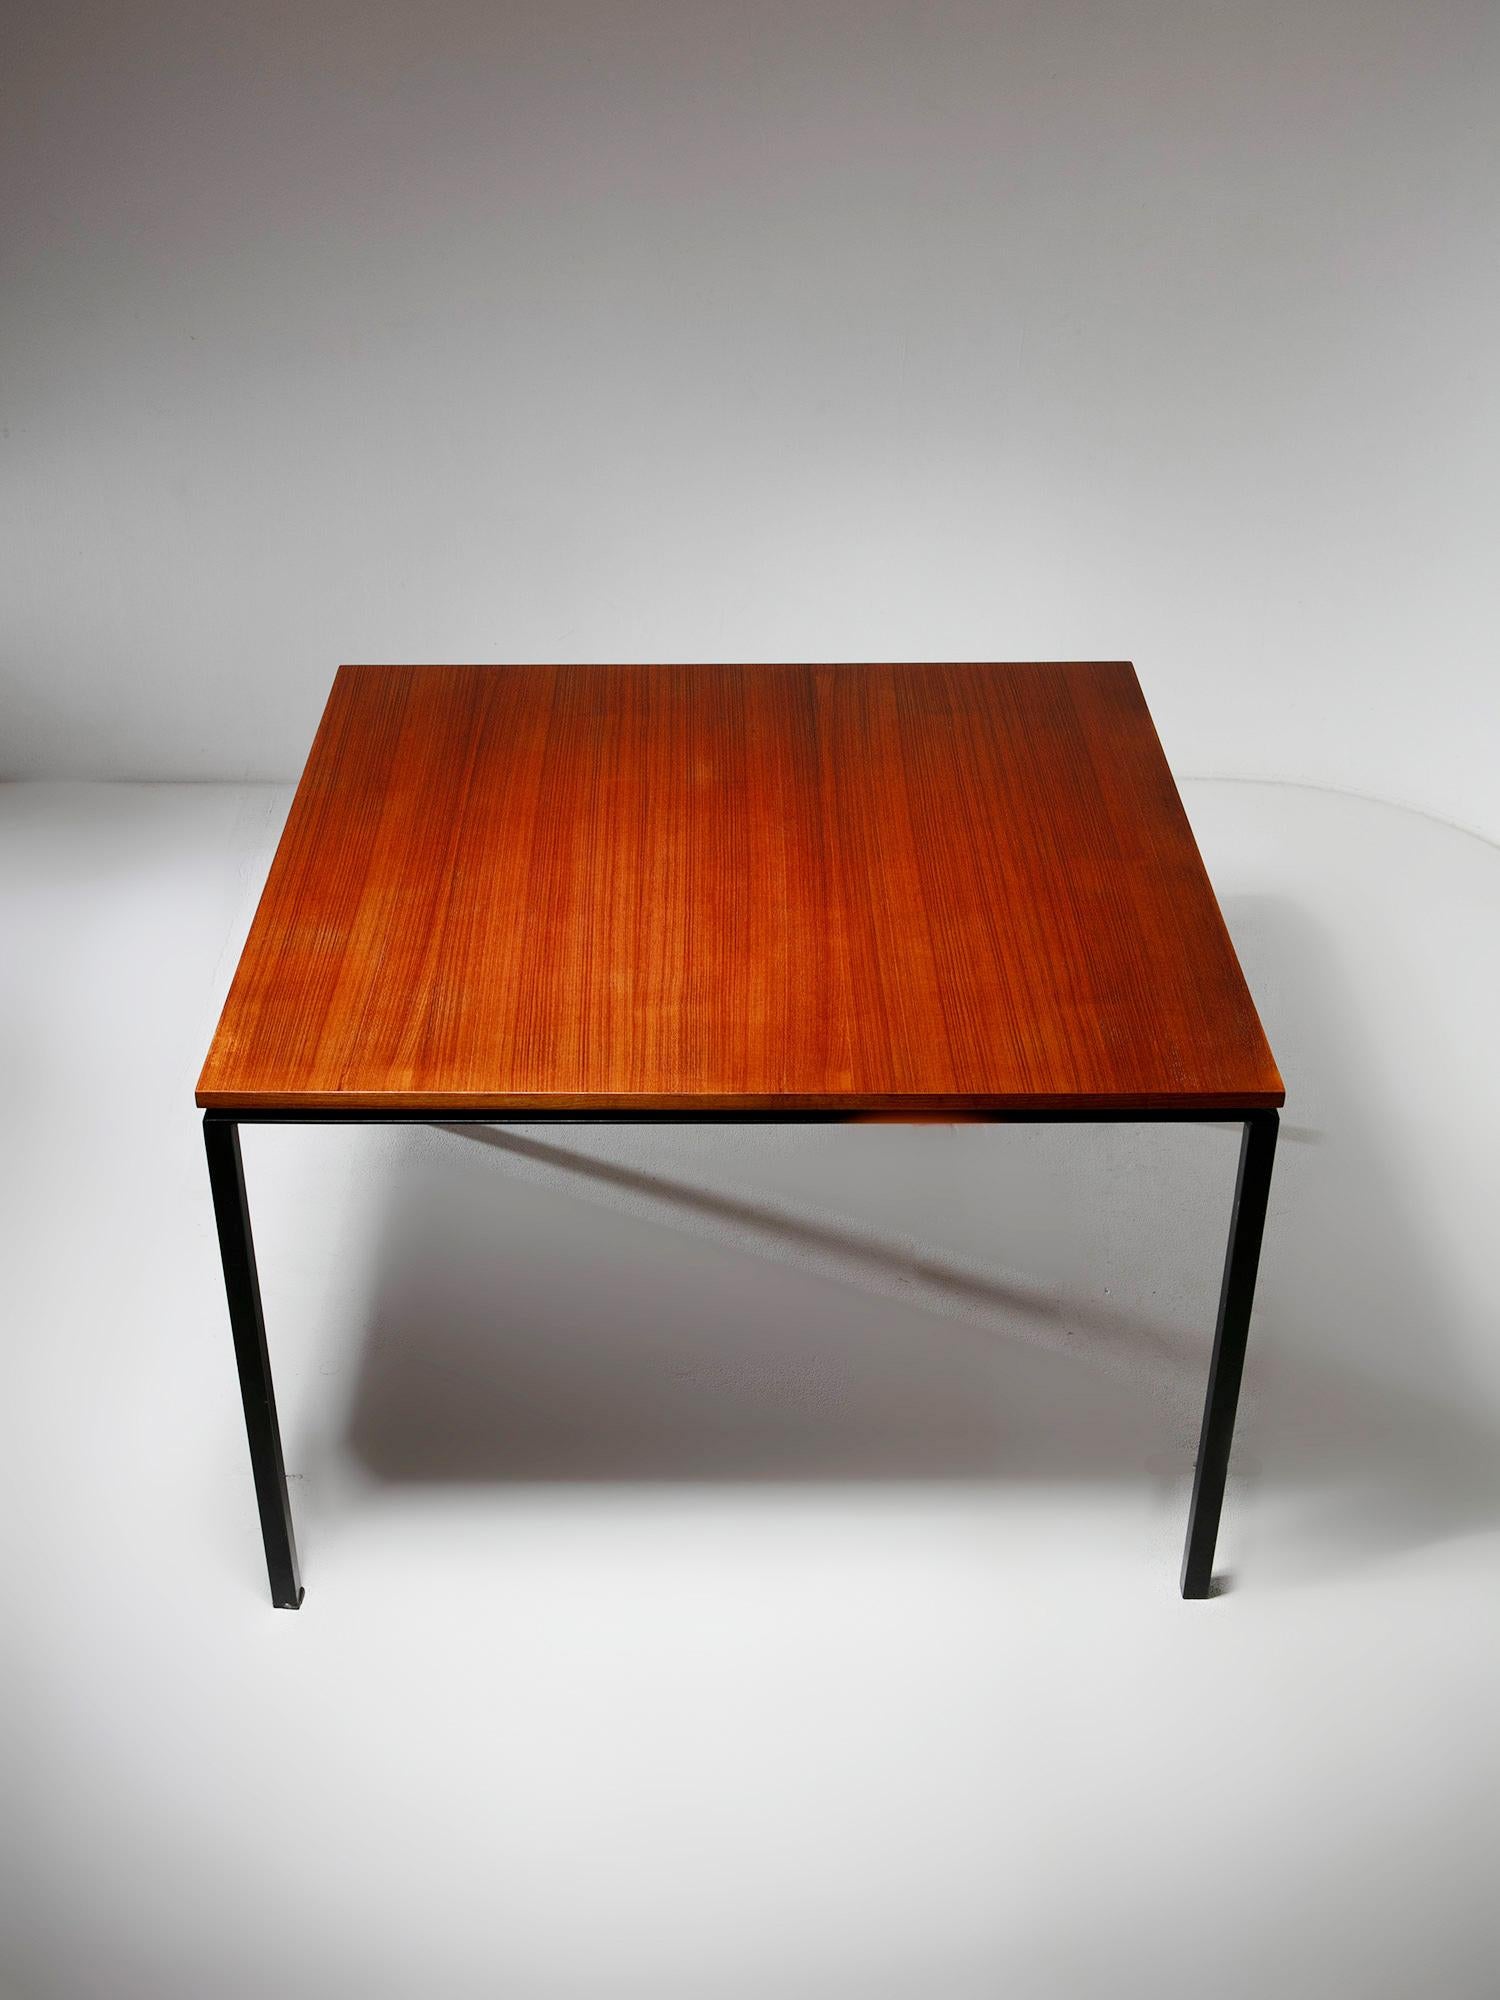 Wood Squared Dining Table by Paolo Tilche for Arform, Italy, 1950s In Good Condition For Sale In Milan, IT